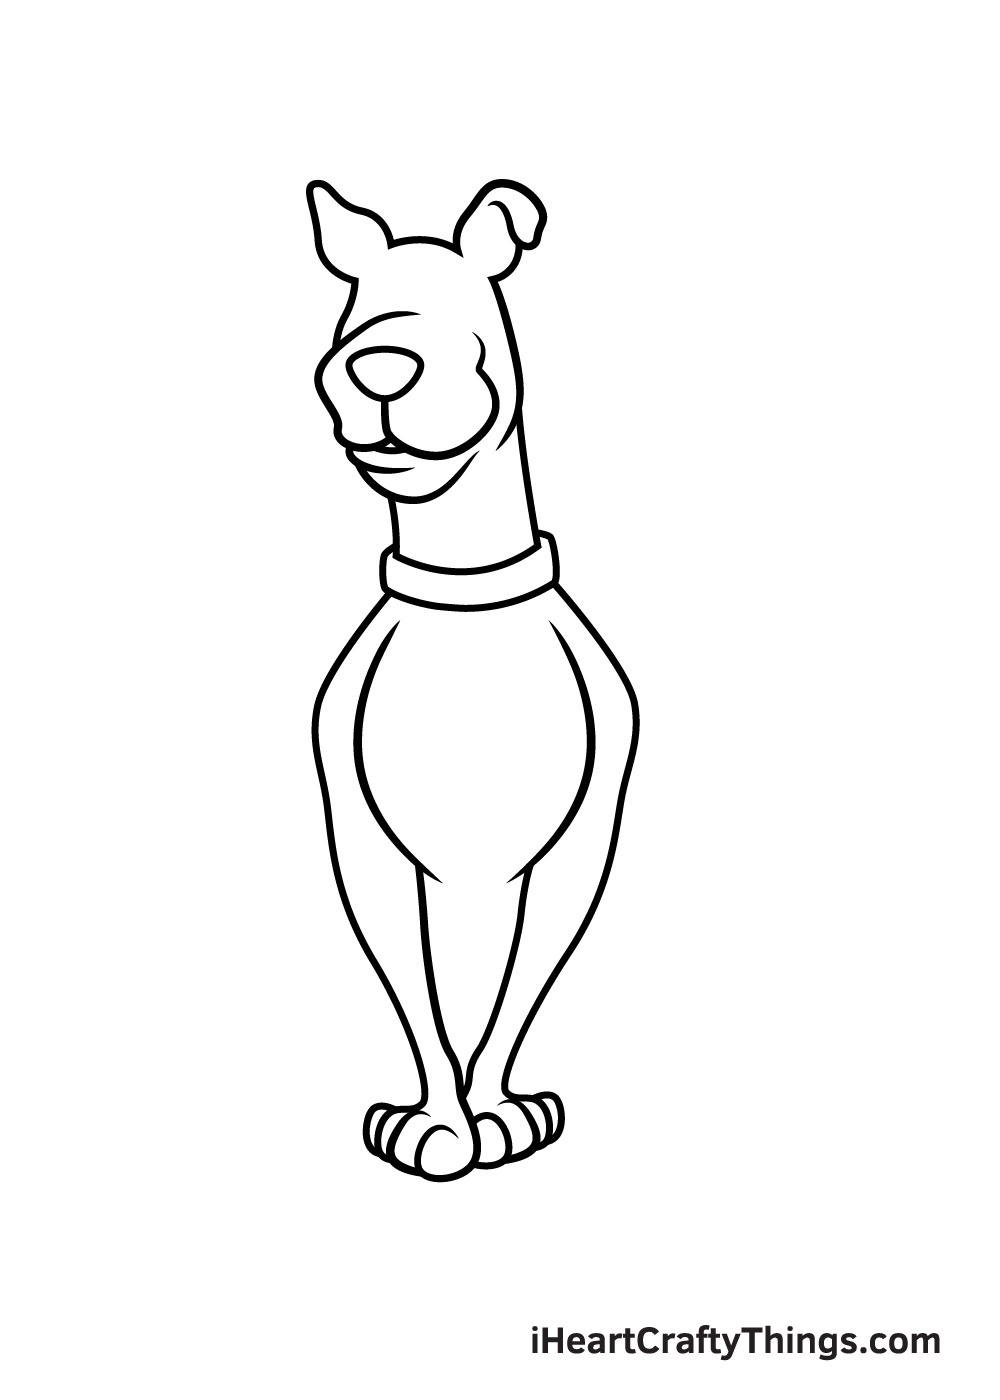 drawing Scooby-Doo step 6